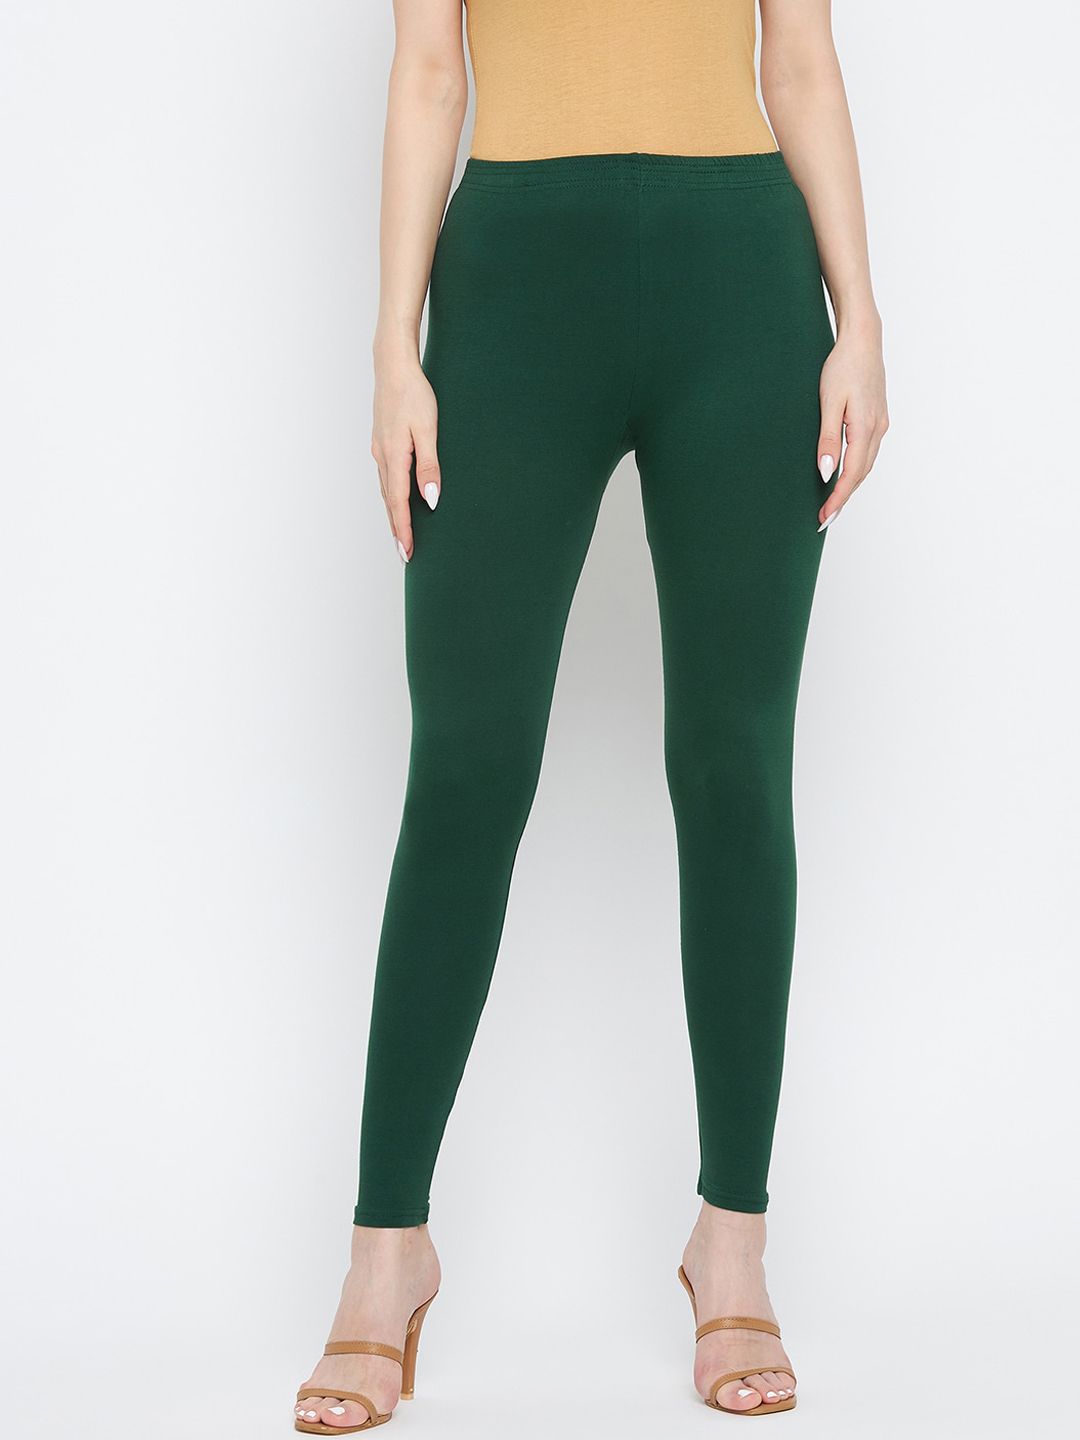 Clora Creation Women Green Solid Ankle Length Leggings Price in India